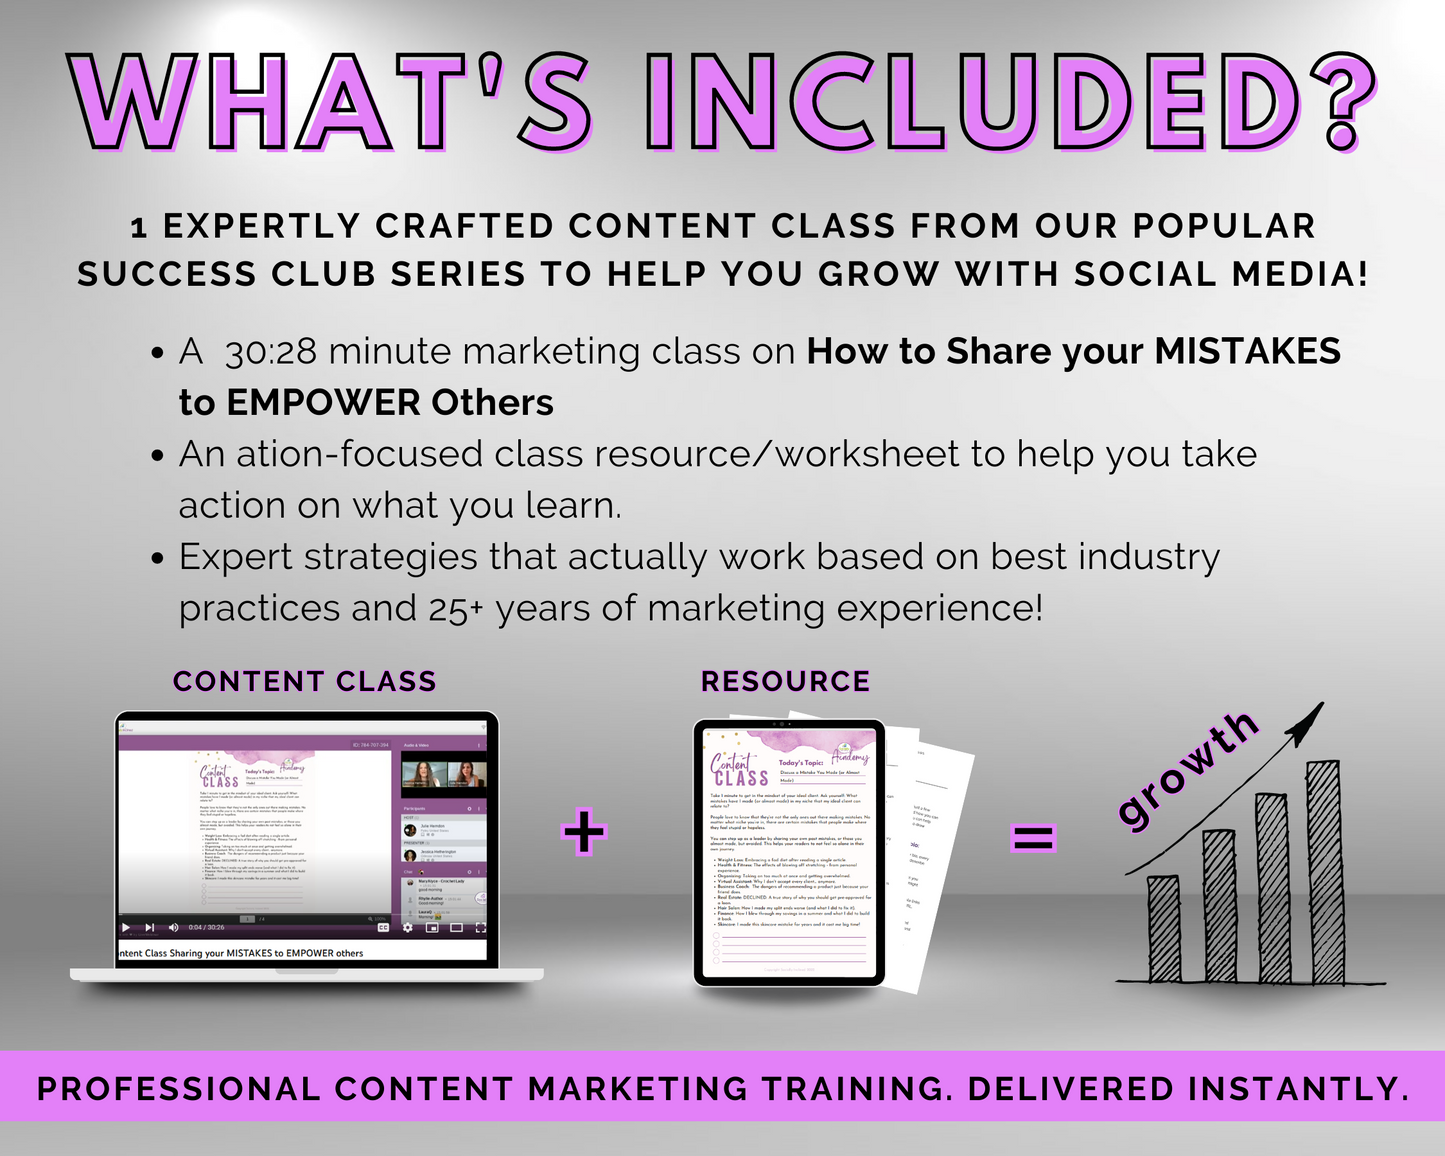 Content Class - How to Share your MISTAKES to EMPOWER Others Masterclass